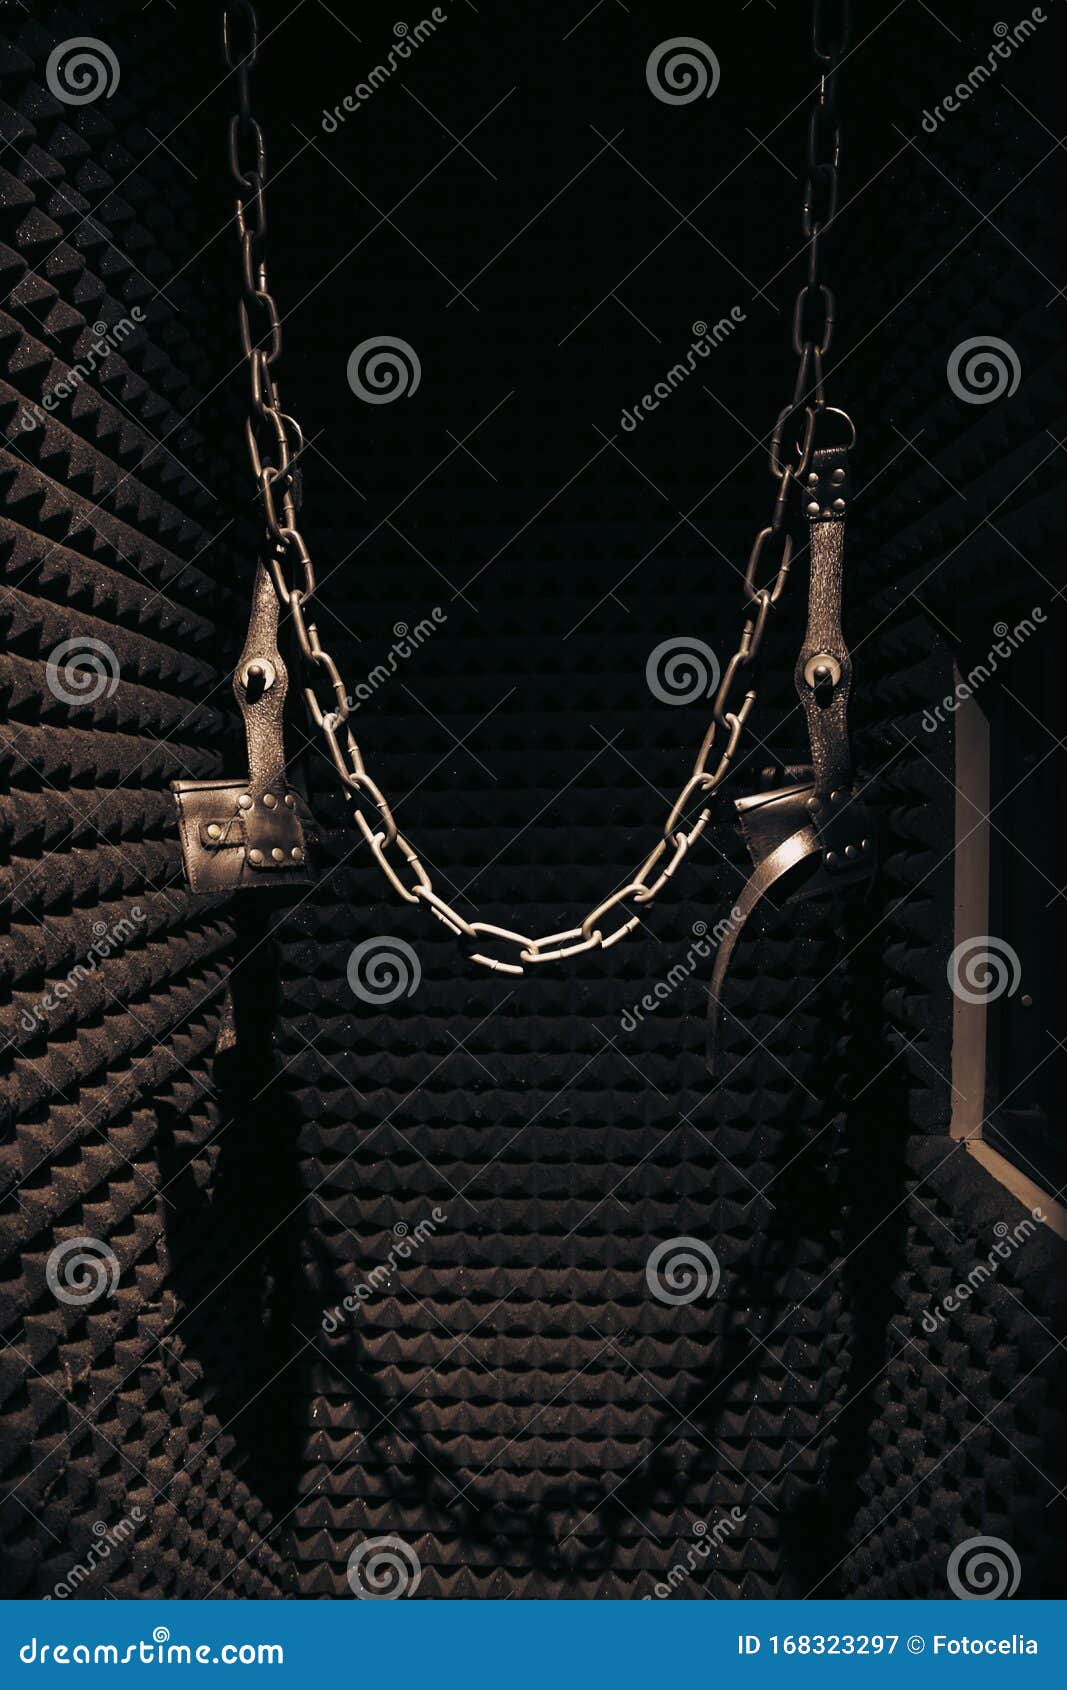 Chains And Wives Sadomasochism Stock Image Image Of Adult Female 168323297